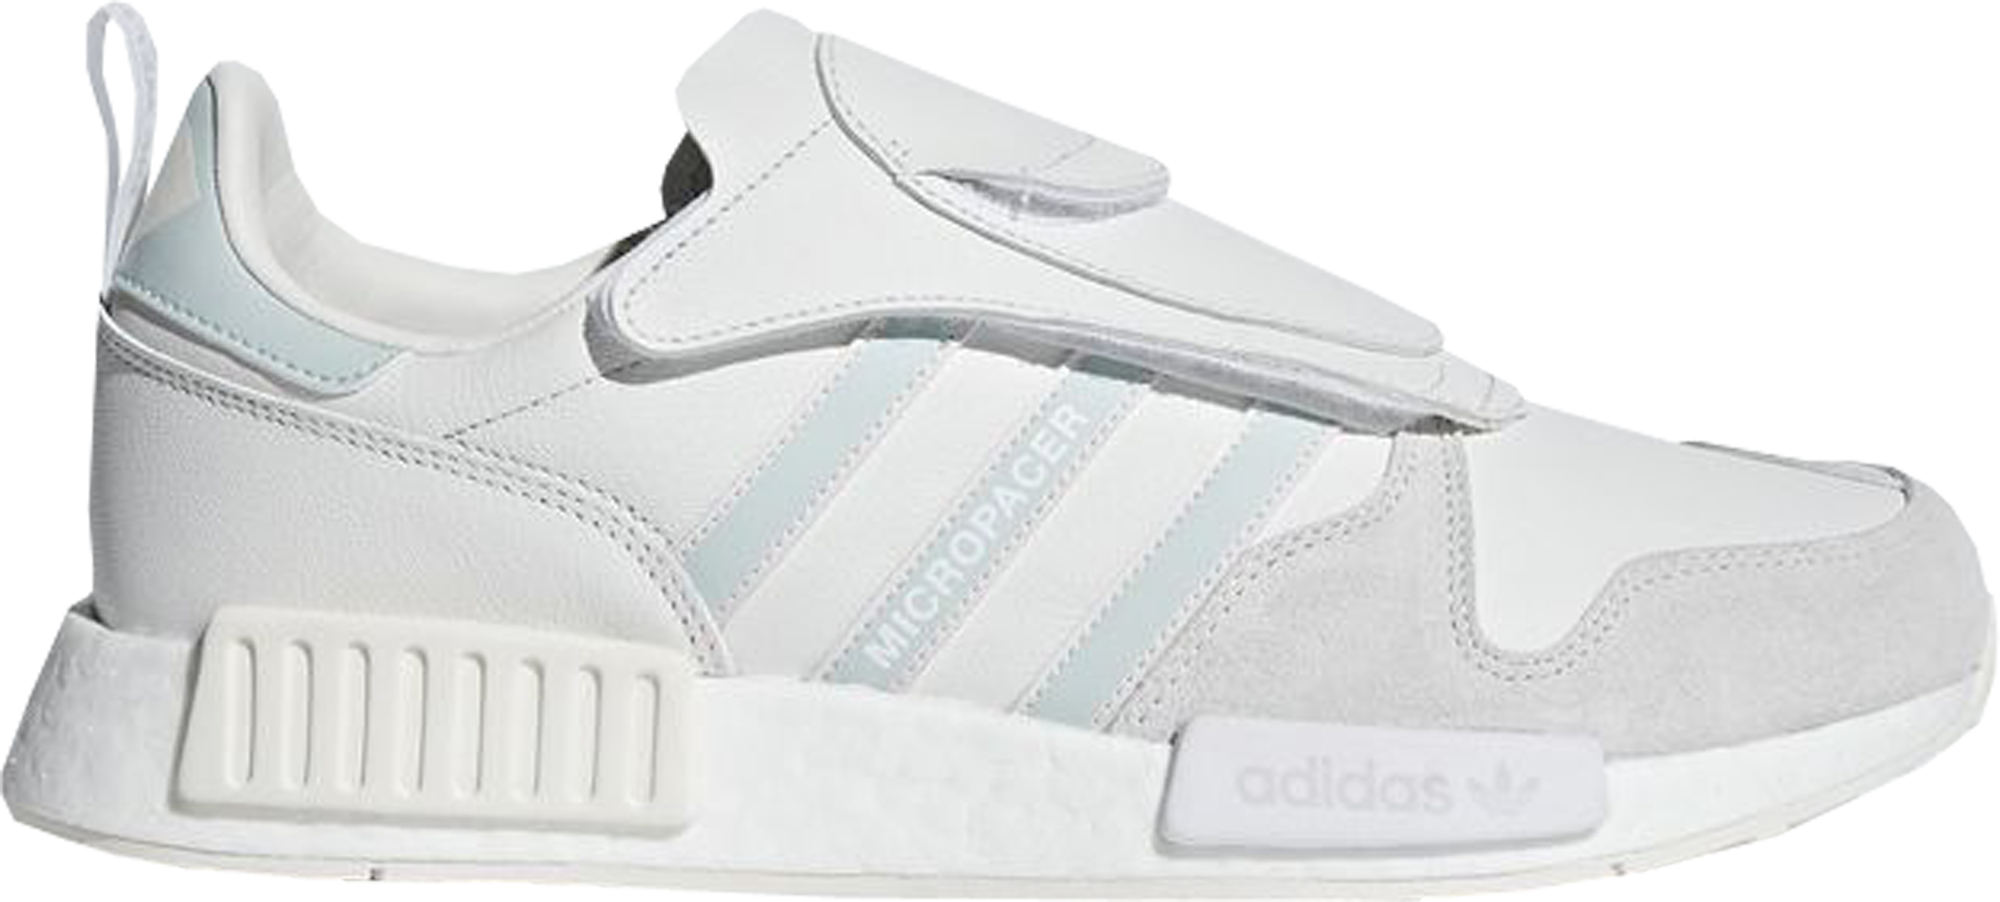 adidas Micropacer x R1 Never Made Pack Triple White - G28940